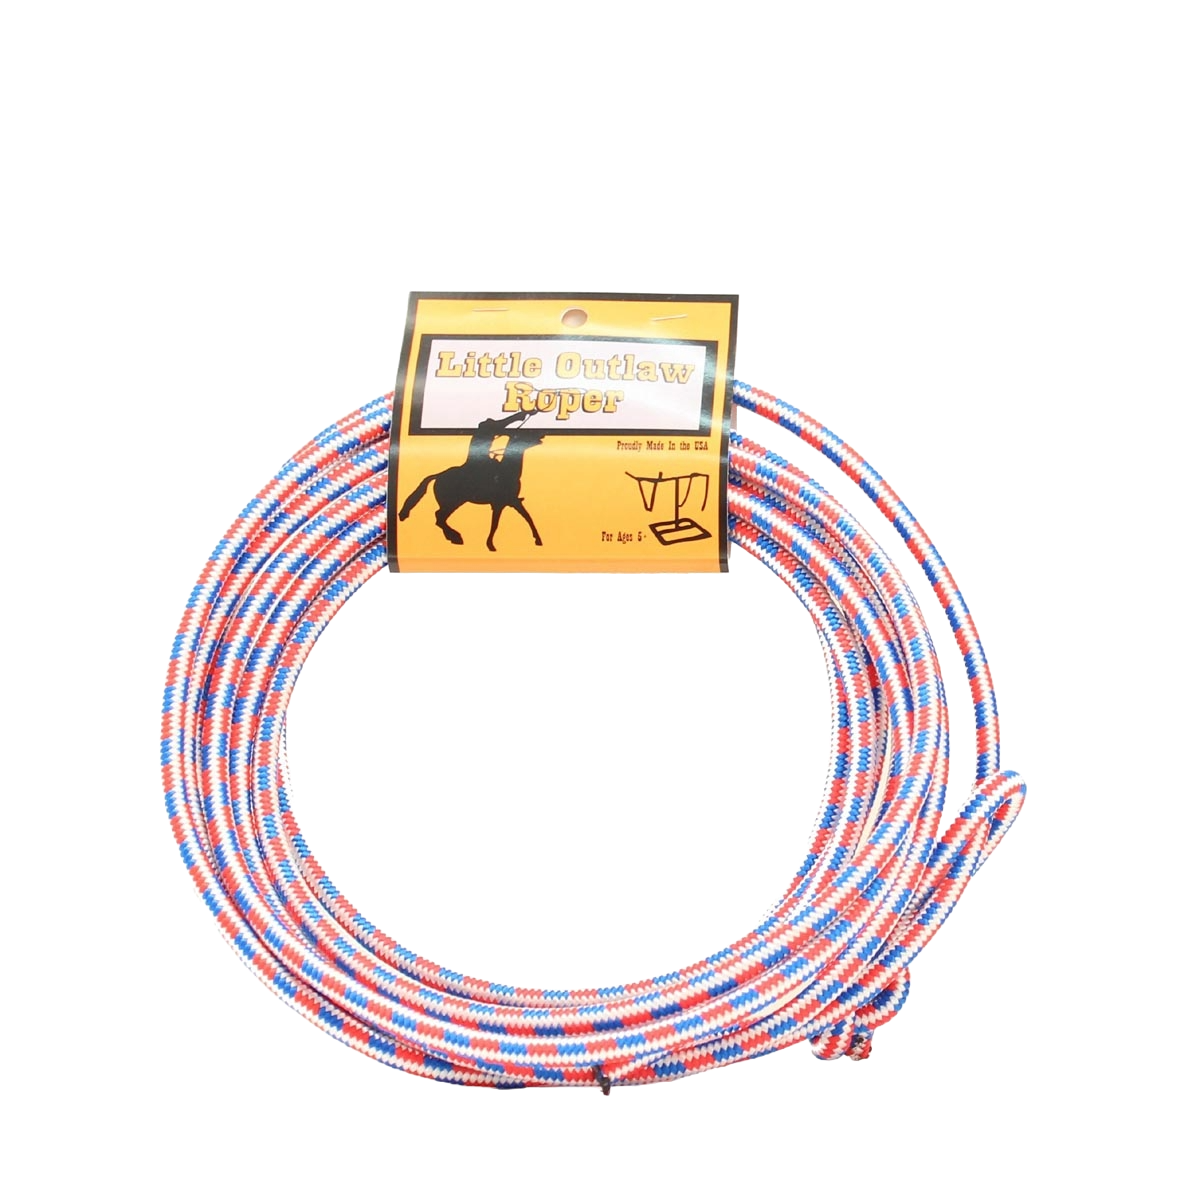 Little Outlaw Roper Red, White & Blue Toy Lasso 5010397